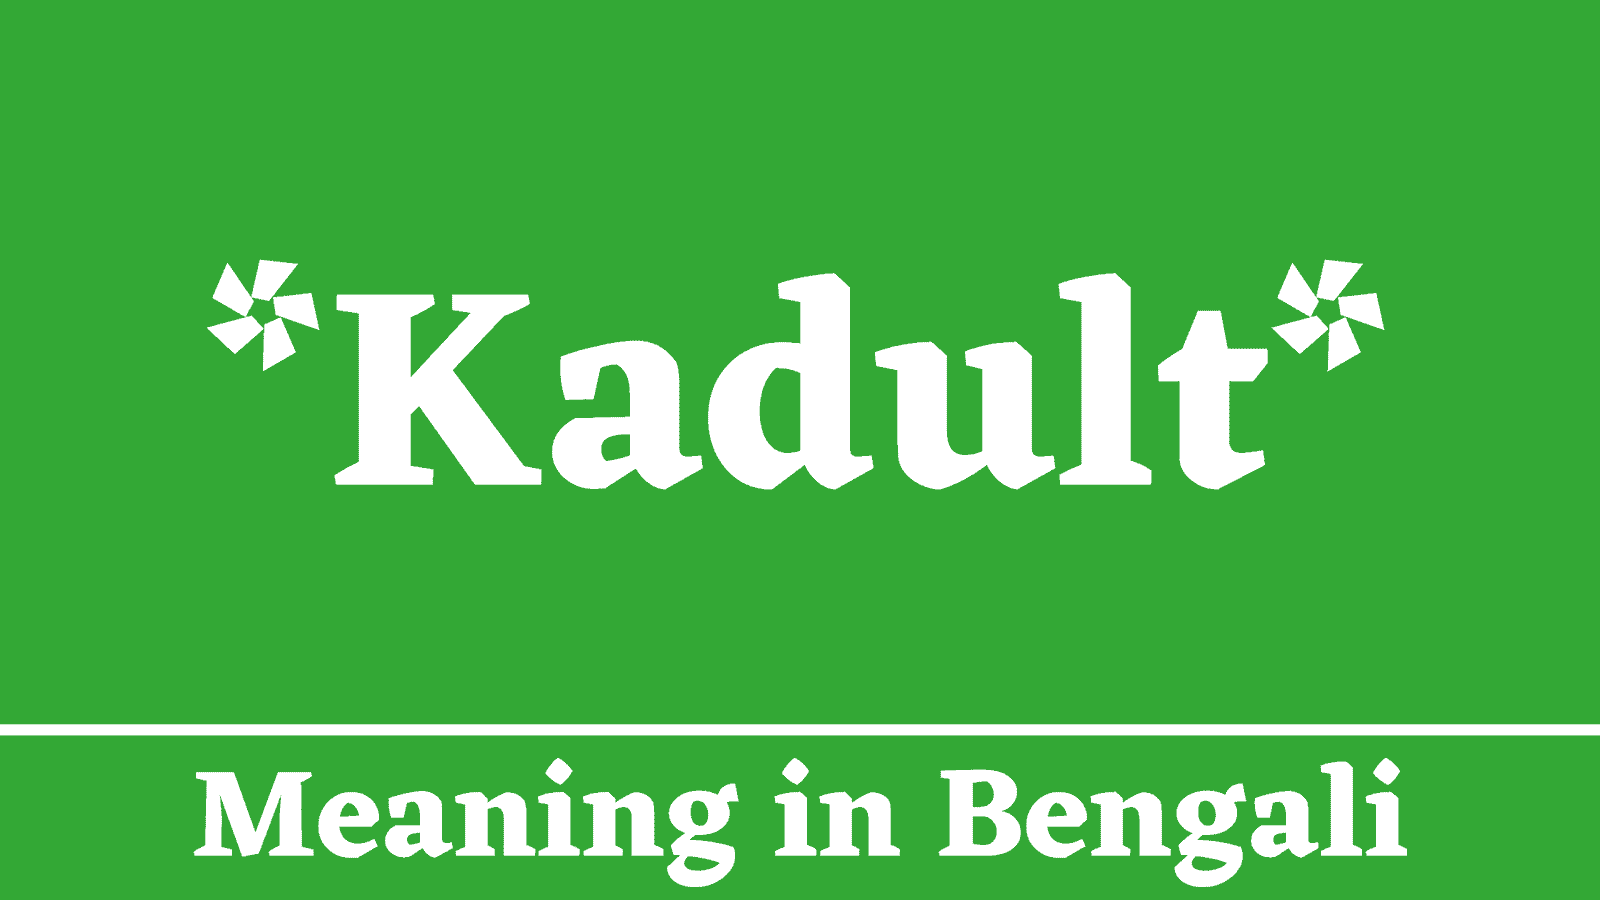 Kadult Meaning in Bengali